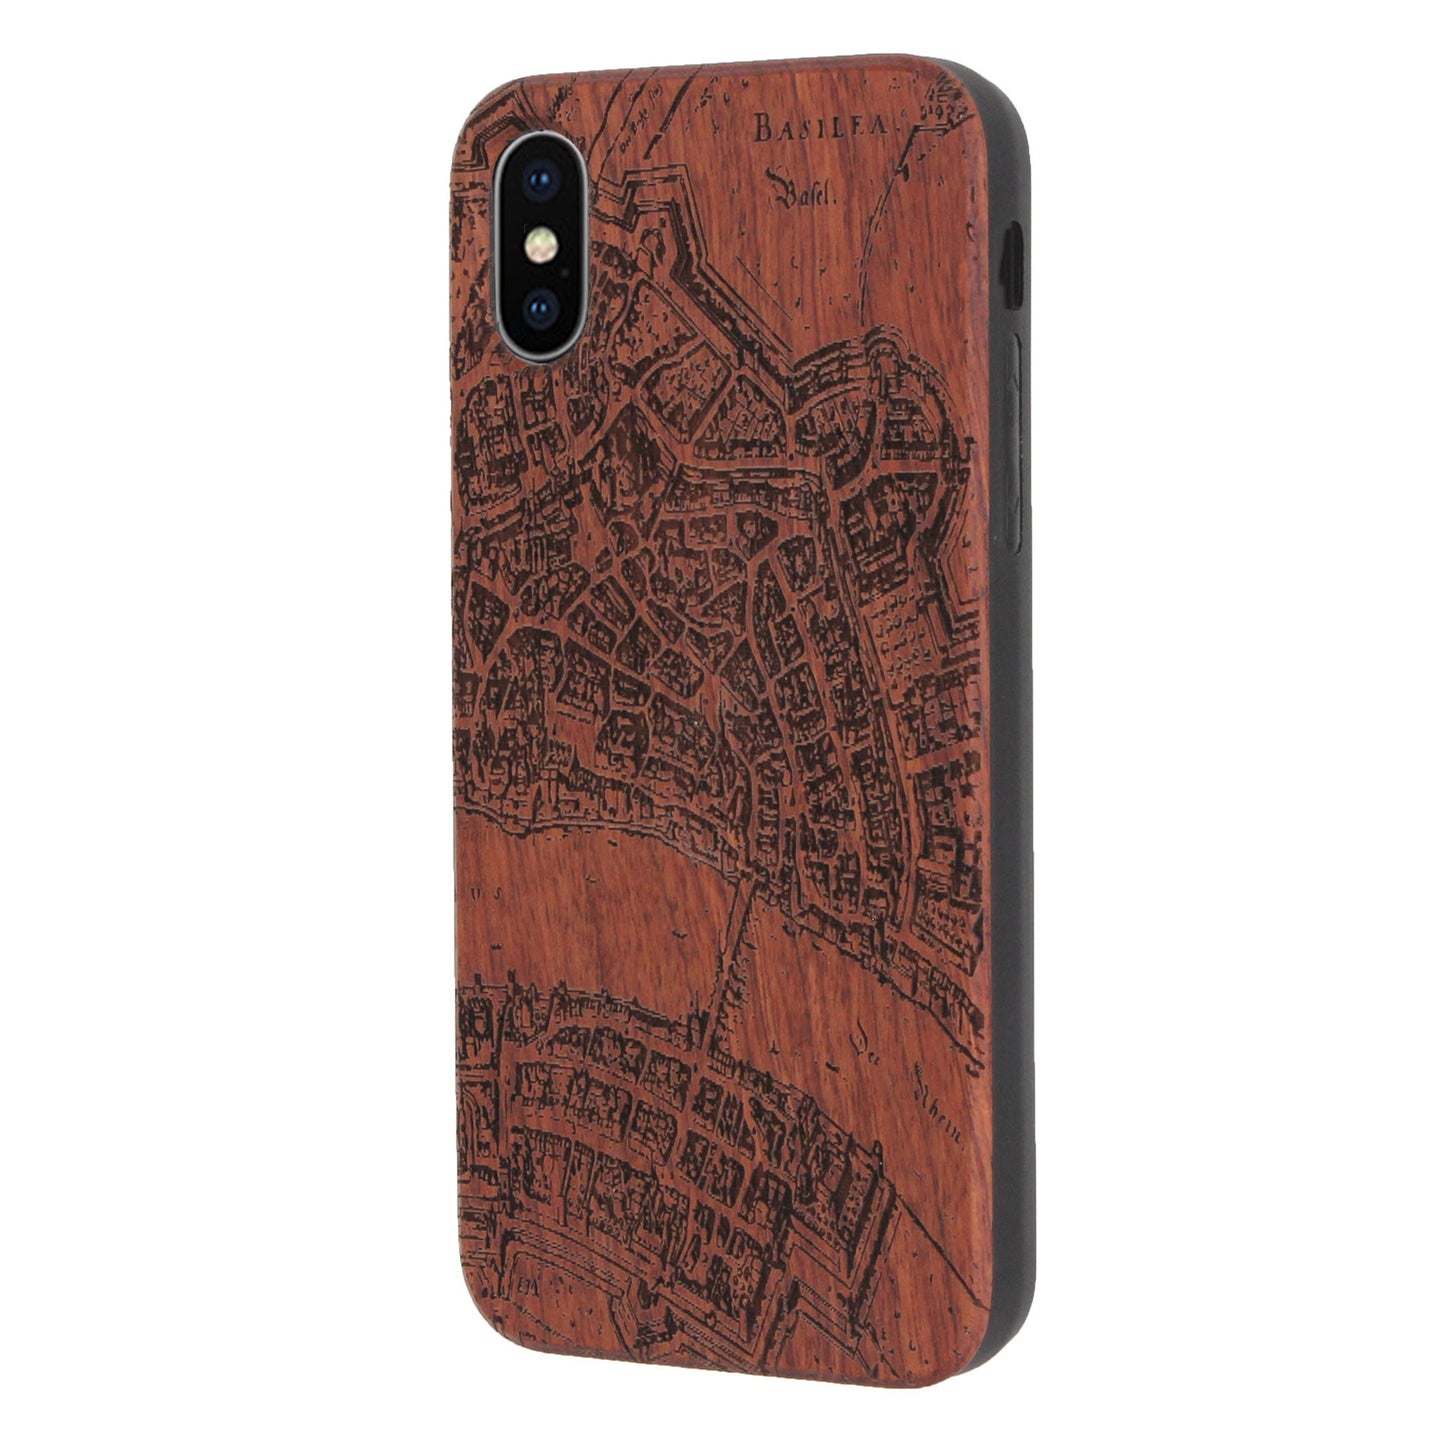 Basel Merian Eden Rosewood Case for iPhone X/XS